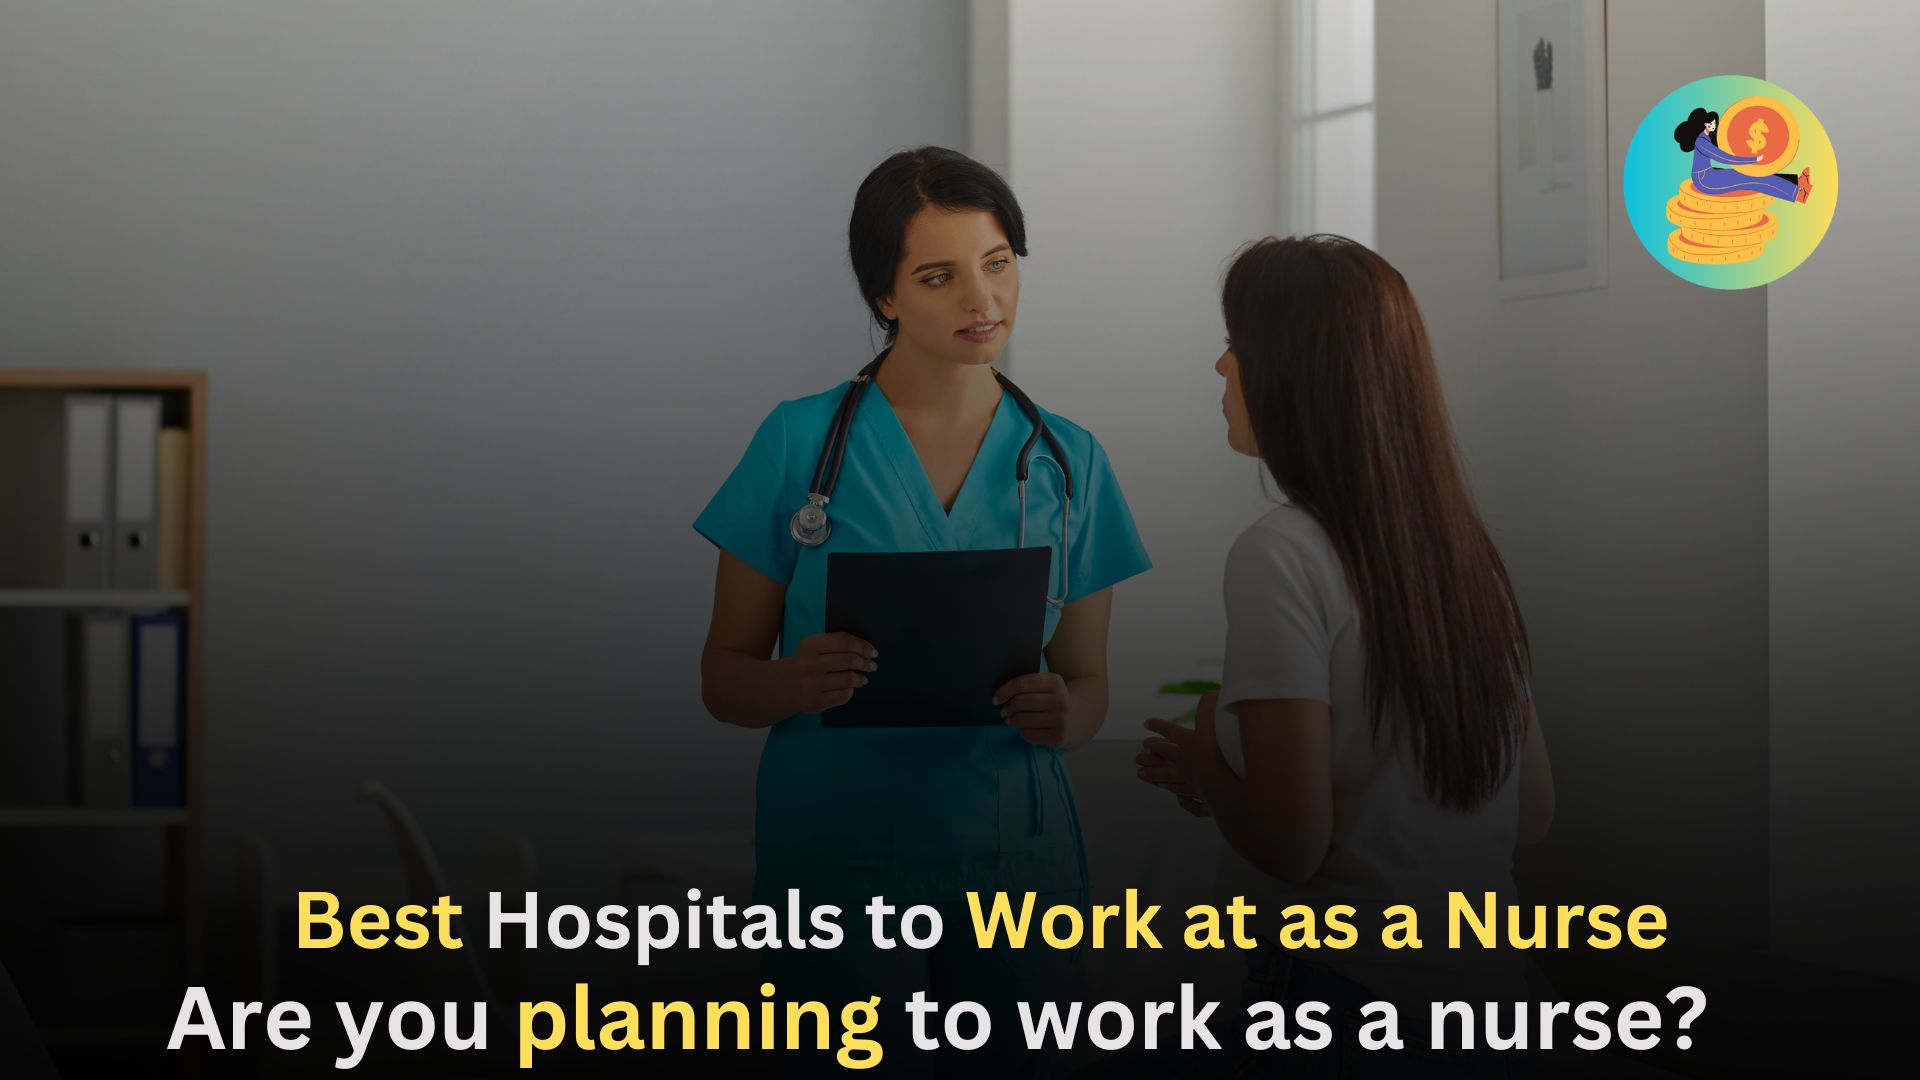 Best Hospitals to Work at as a Nurse,Are you planning to work as a nurse